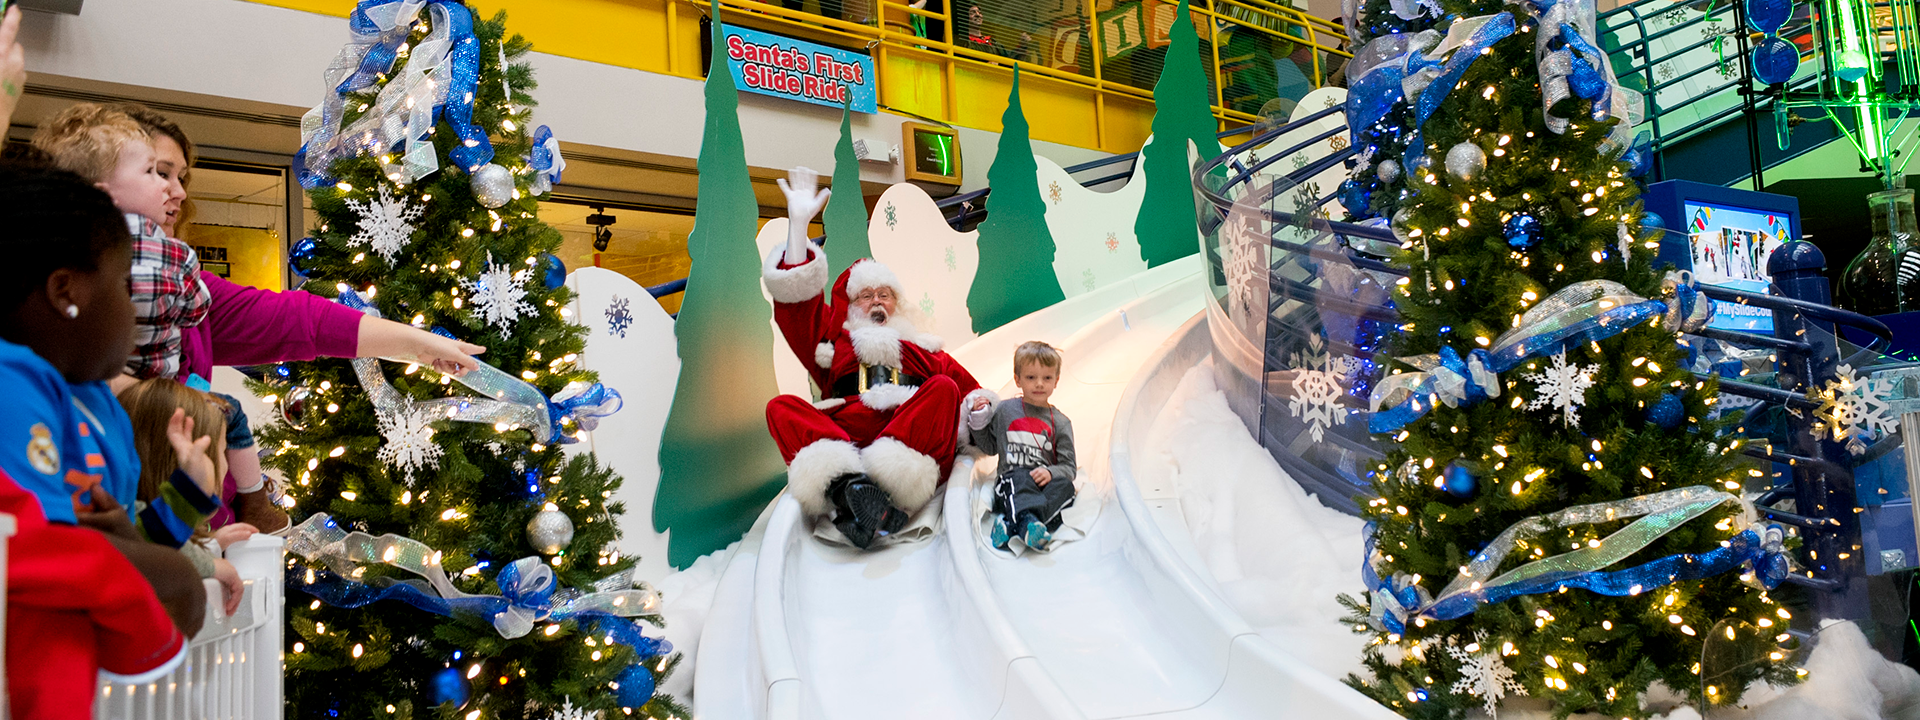 Santa and child going down the Yule Slide